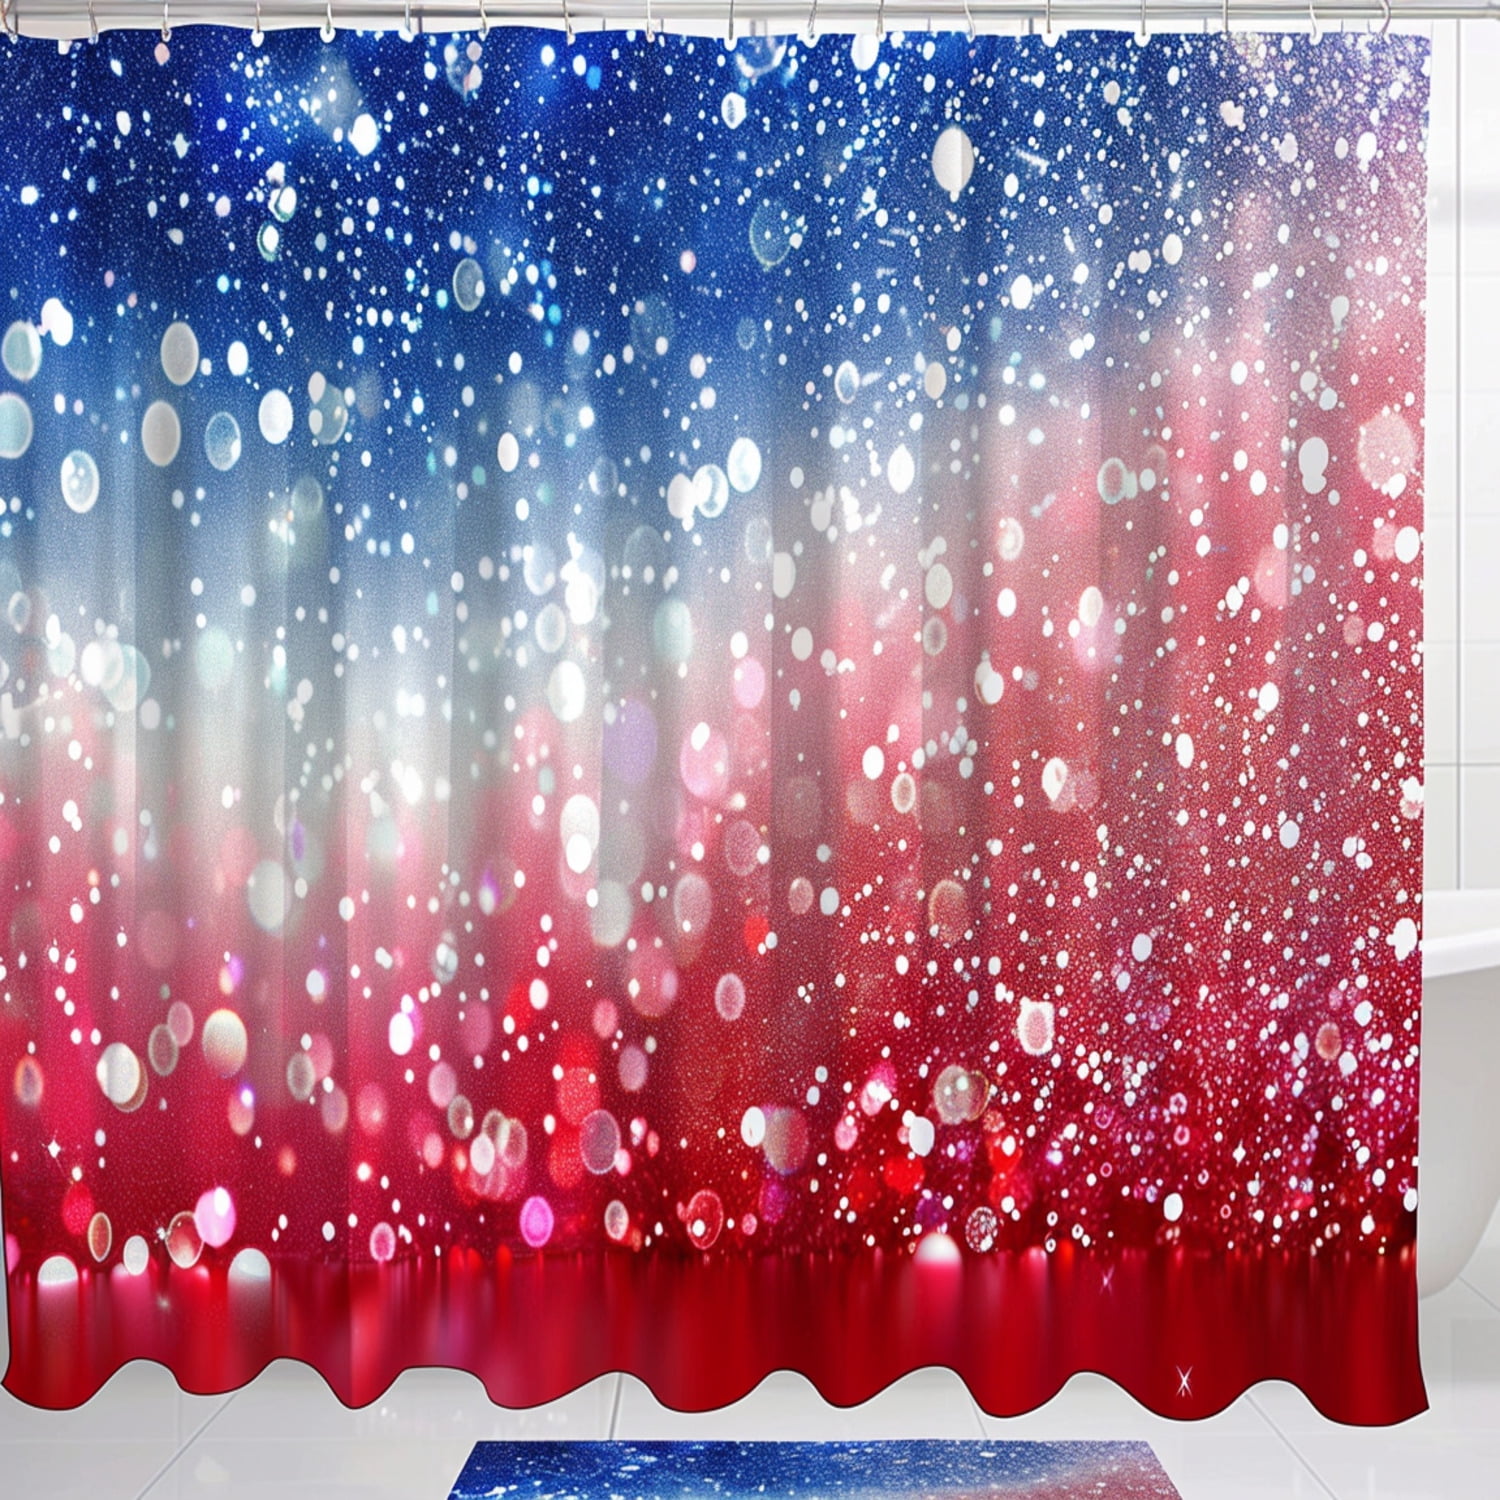 3D Gradient Red White Blue Glitter Shower Curtain with Bokeh Effect ...